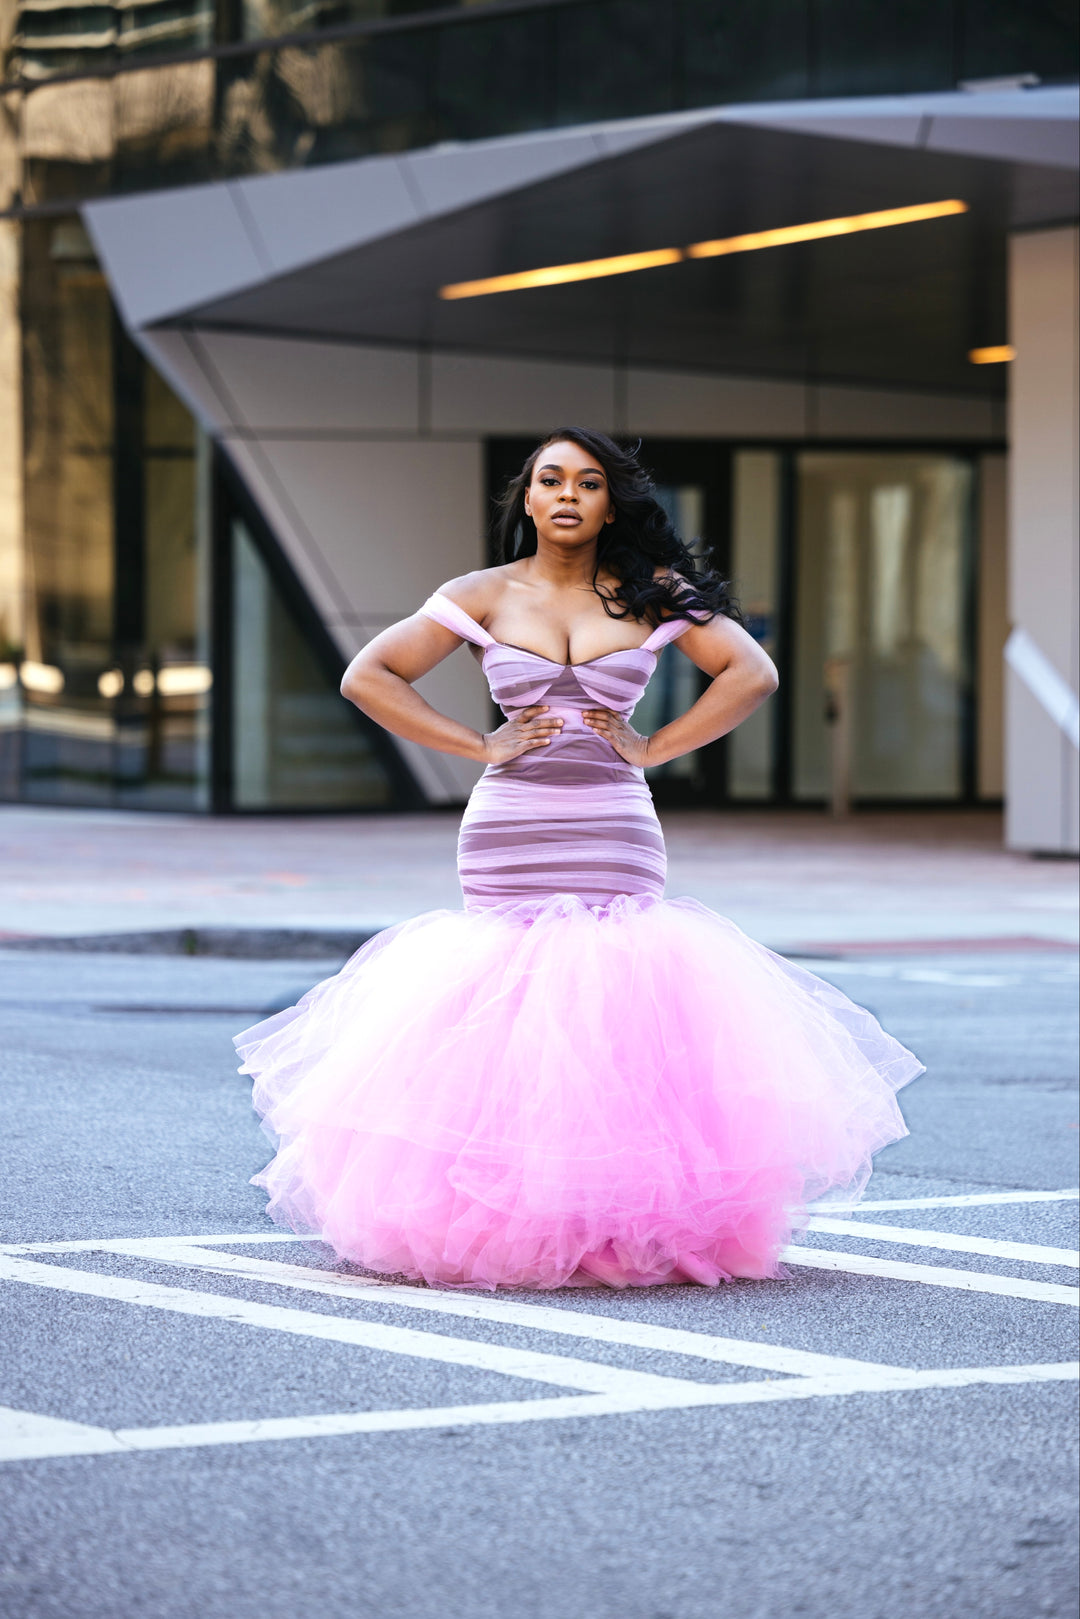 Oyemwen Business in front, Party in the back mermaid tulle dress